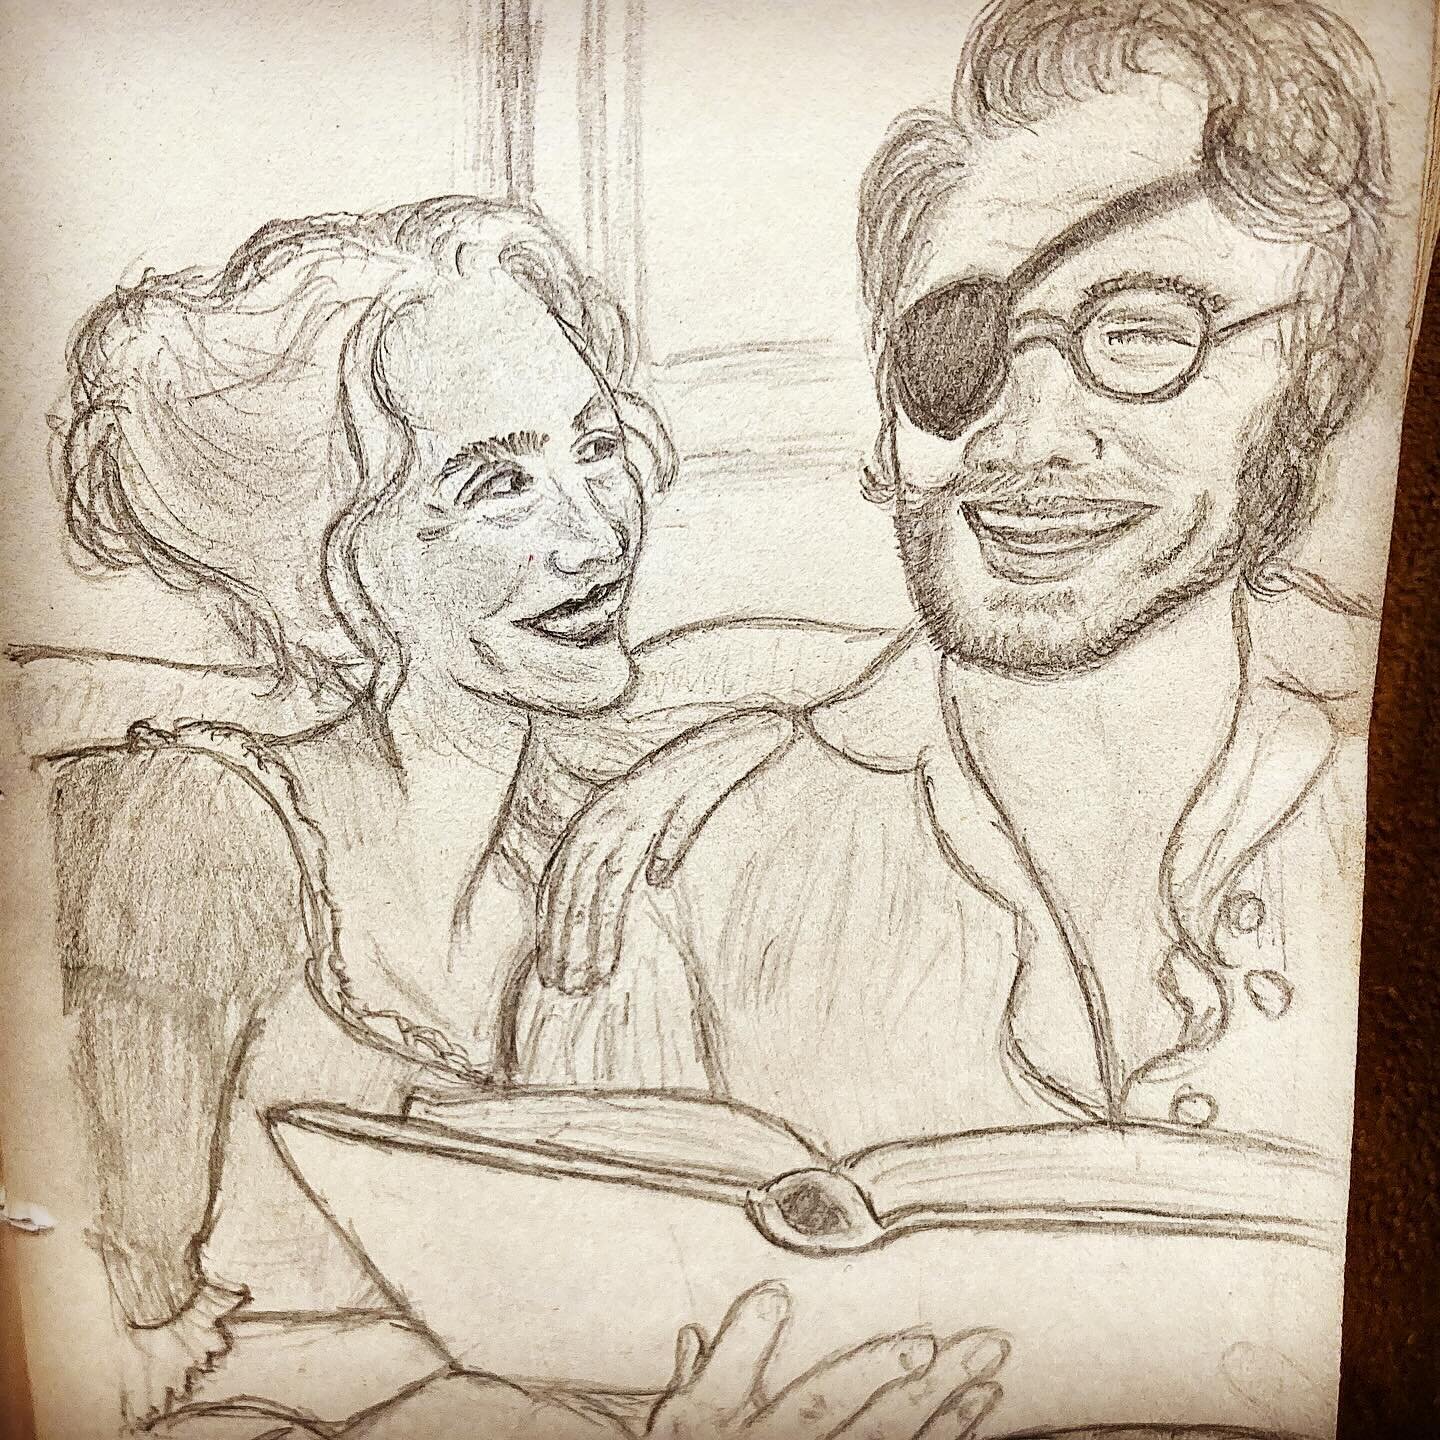 ✍️ Cecelia&rsquo;s Sketchbook

🏰 Another sketch of Charlie and Annabel, our heroes from the first book in the Rowley Family Romance series, Secrets of Castle Rowley.

💕 In this illustration, Charlie is reading Annabel love poetry that was published